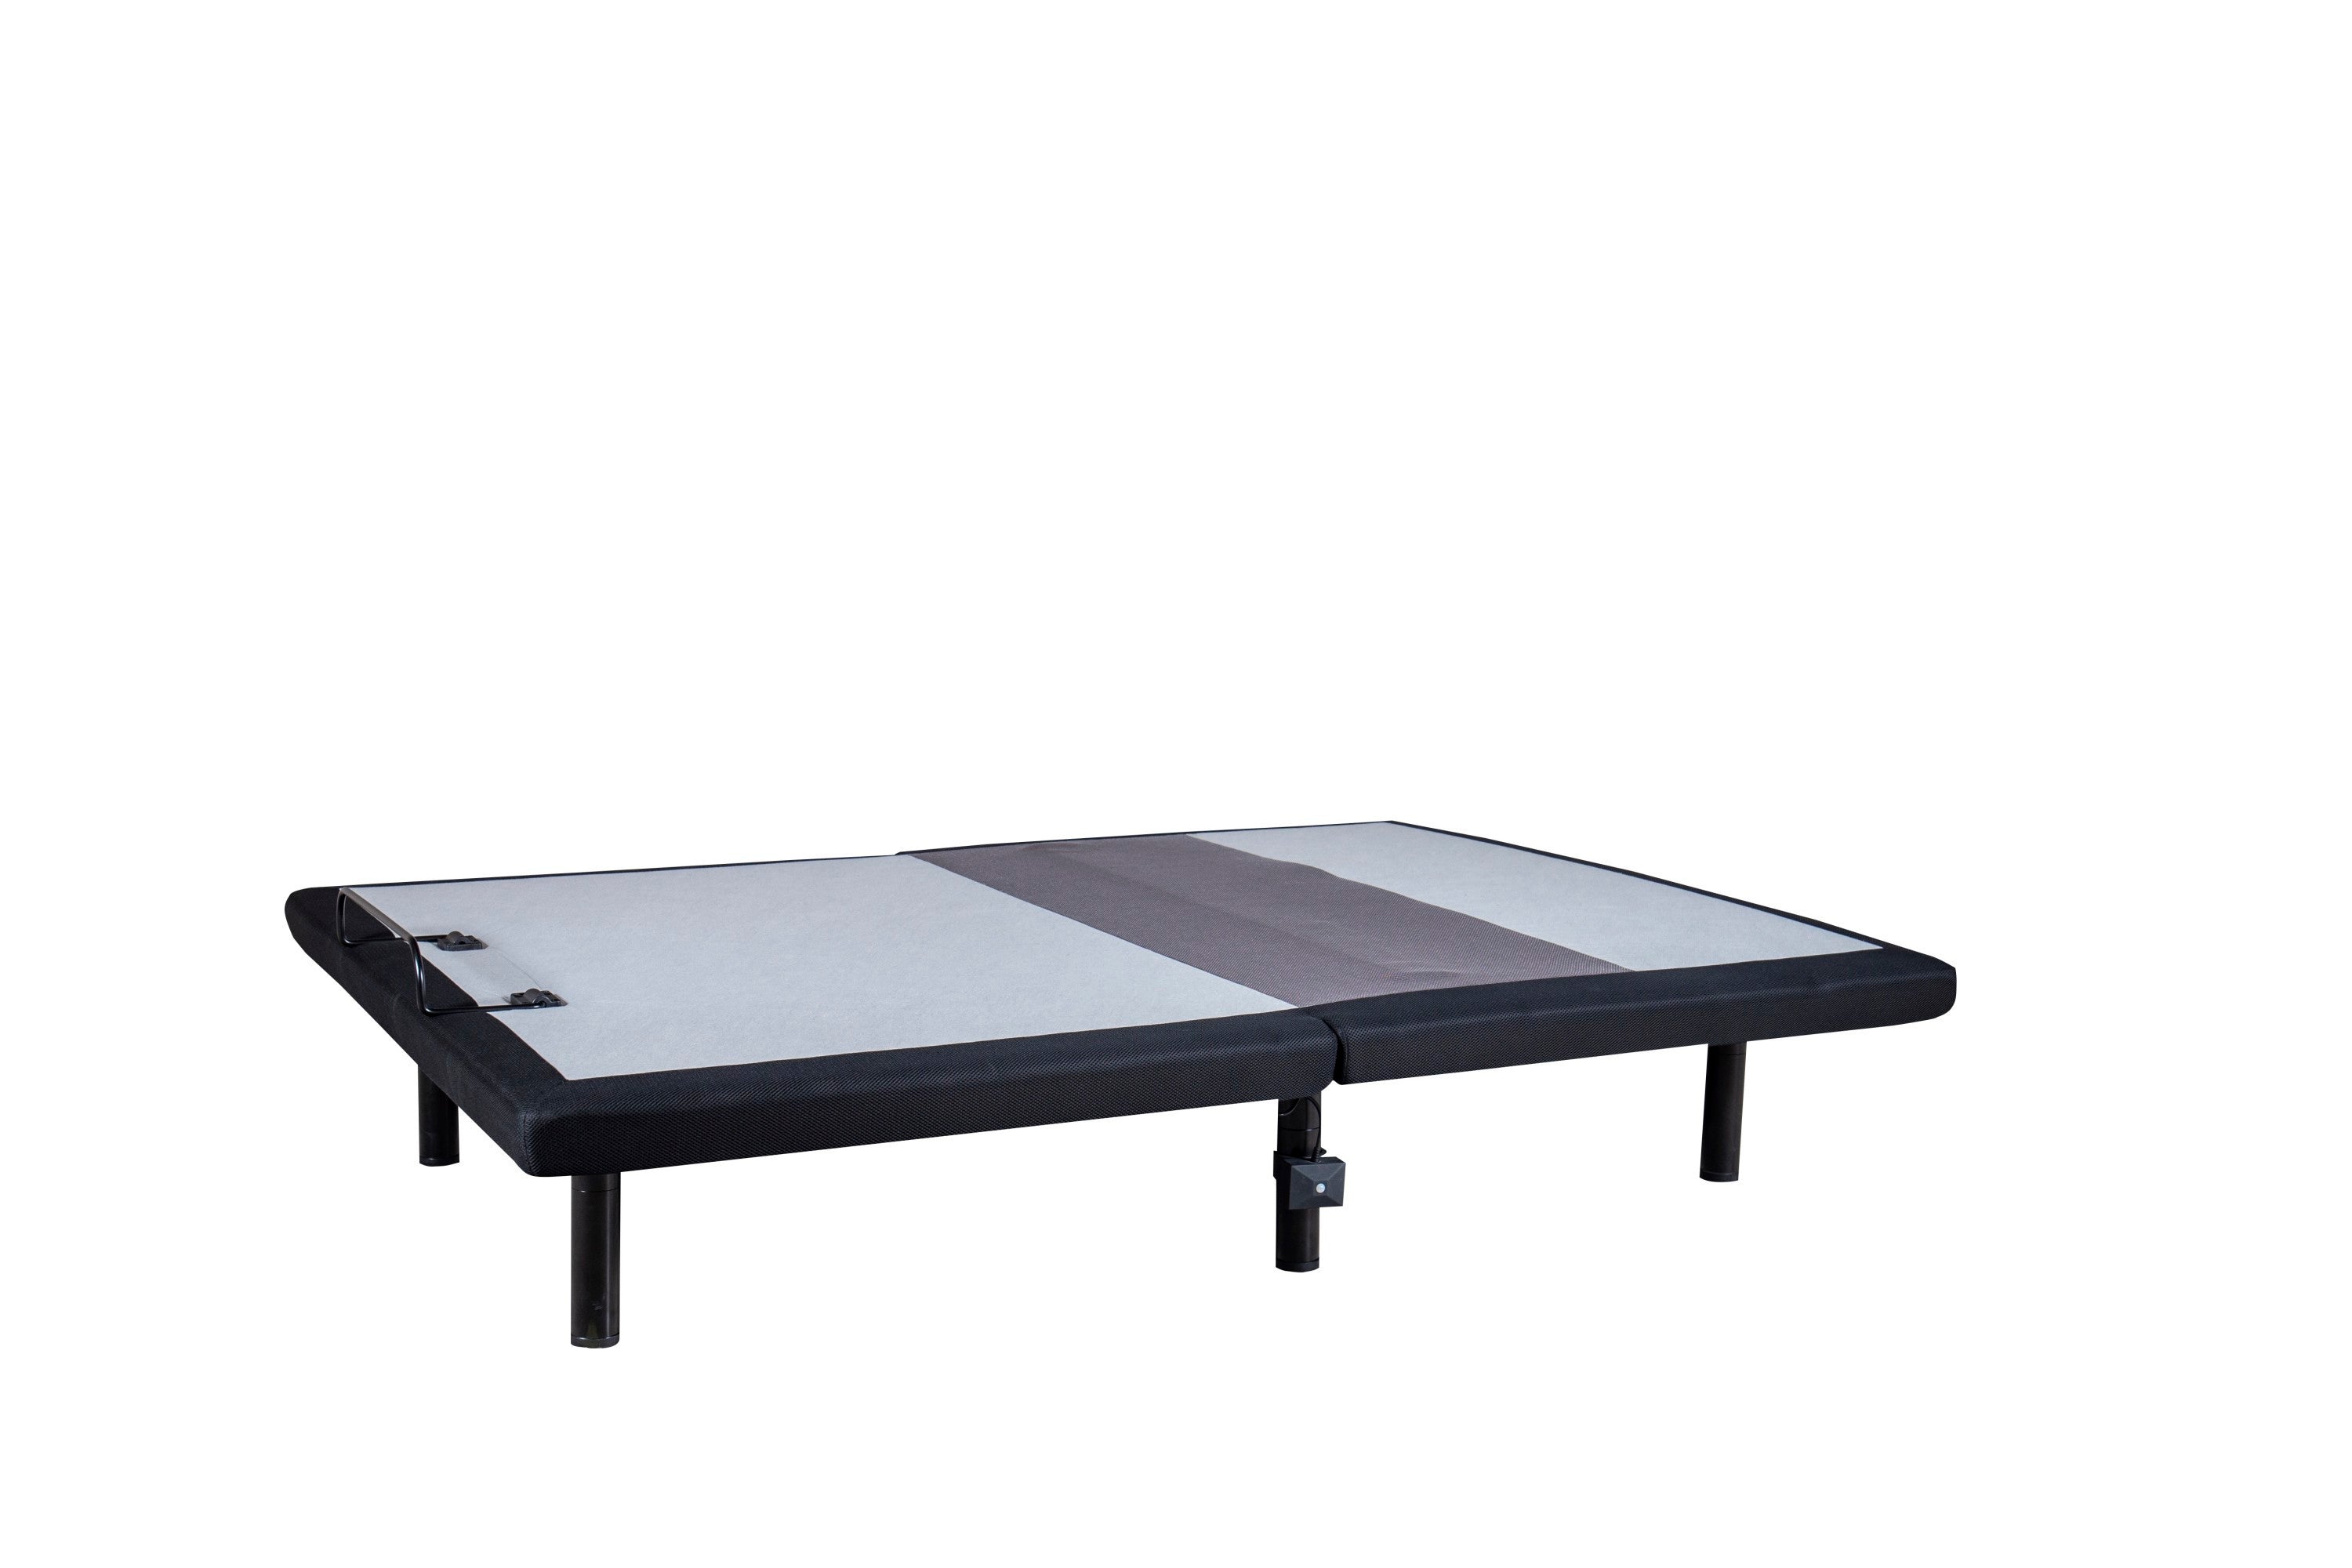 Softform Adjustable Bed Base - Customizable Comfort - Independent Head & Foot Incline - Wireless Remote/App Control